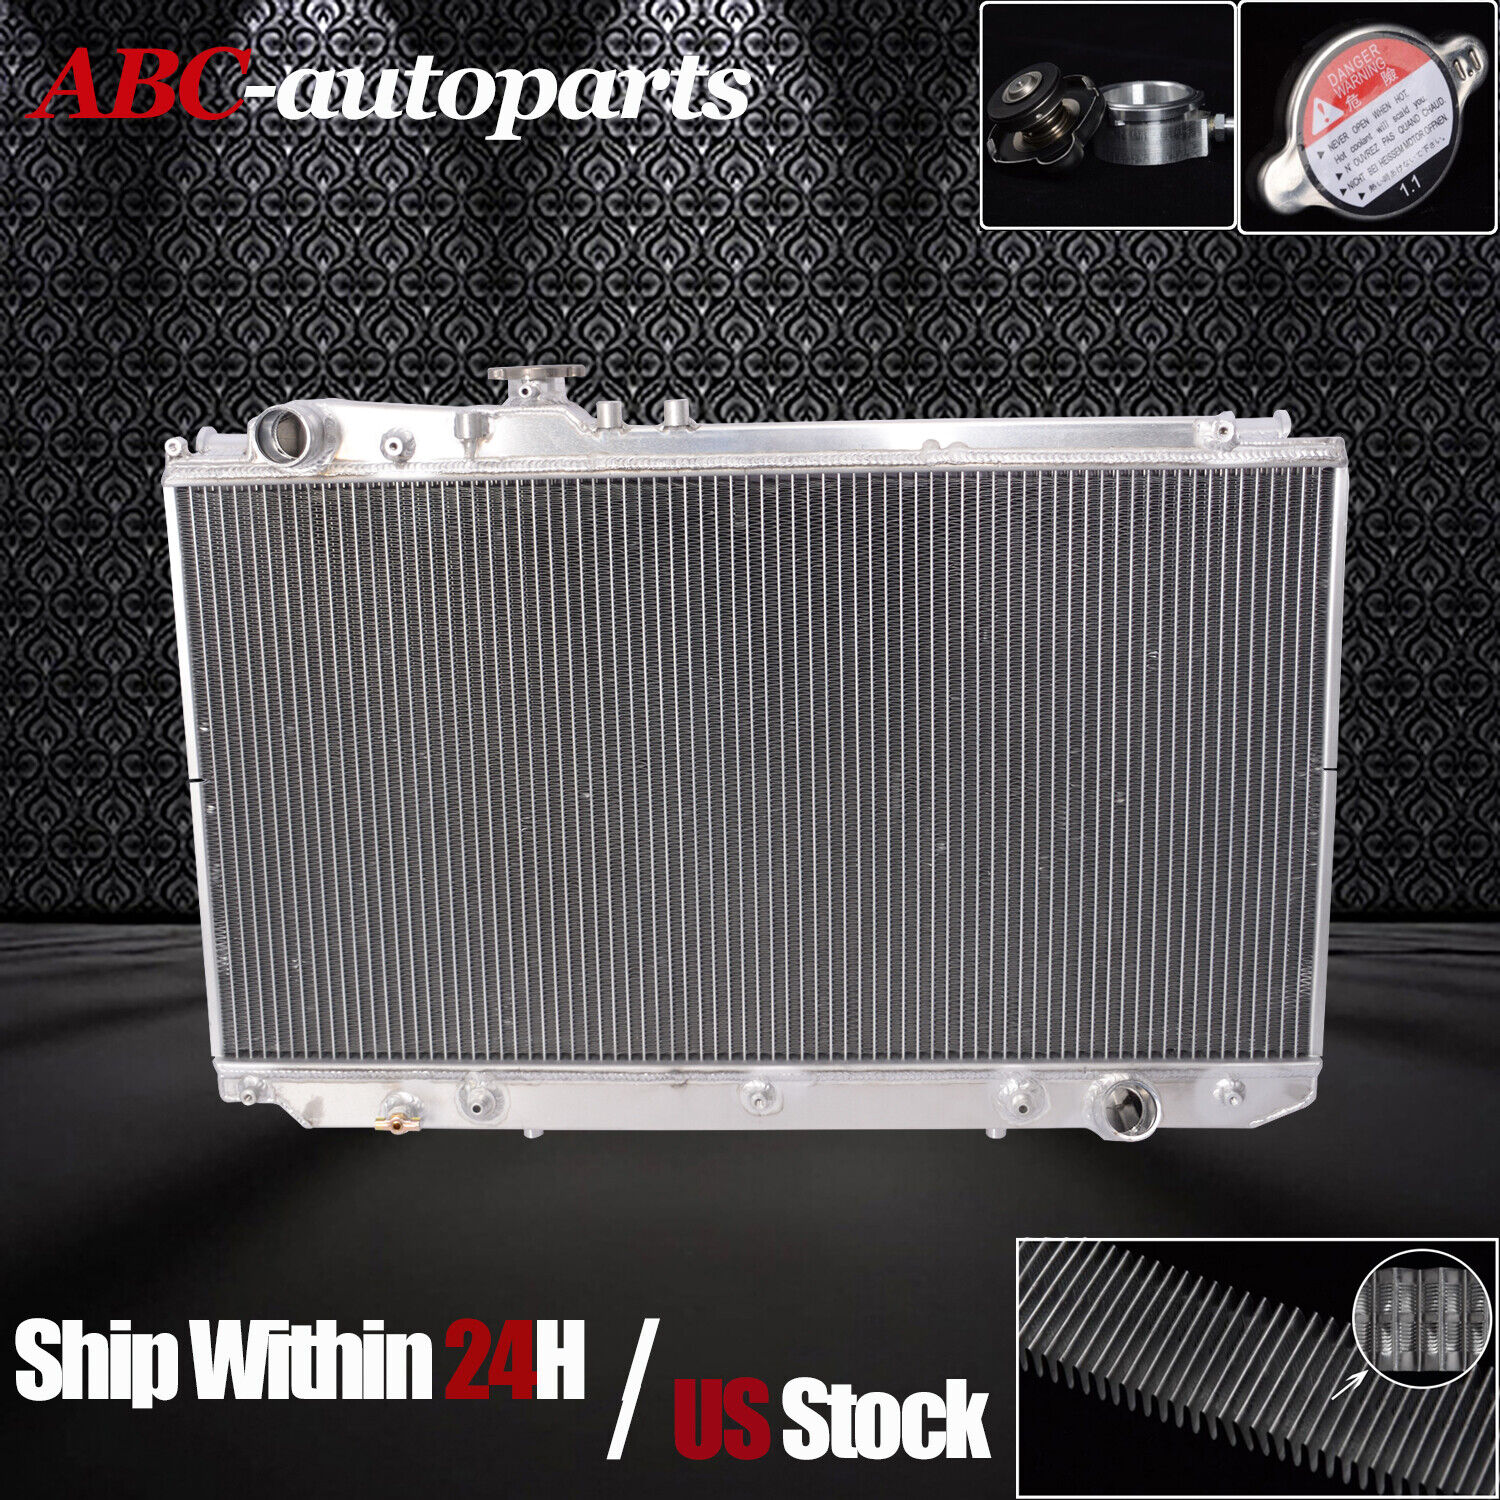 3Rows All Aluminum Radiator Fit For 2002-2010 Lexus SC430 V8 4.3L (A/T)